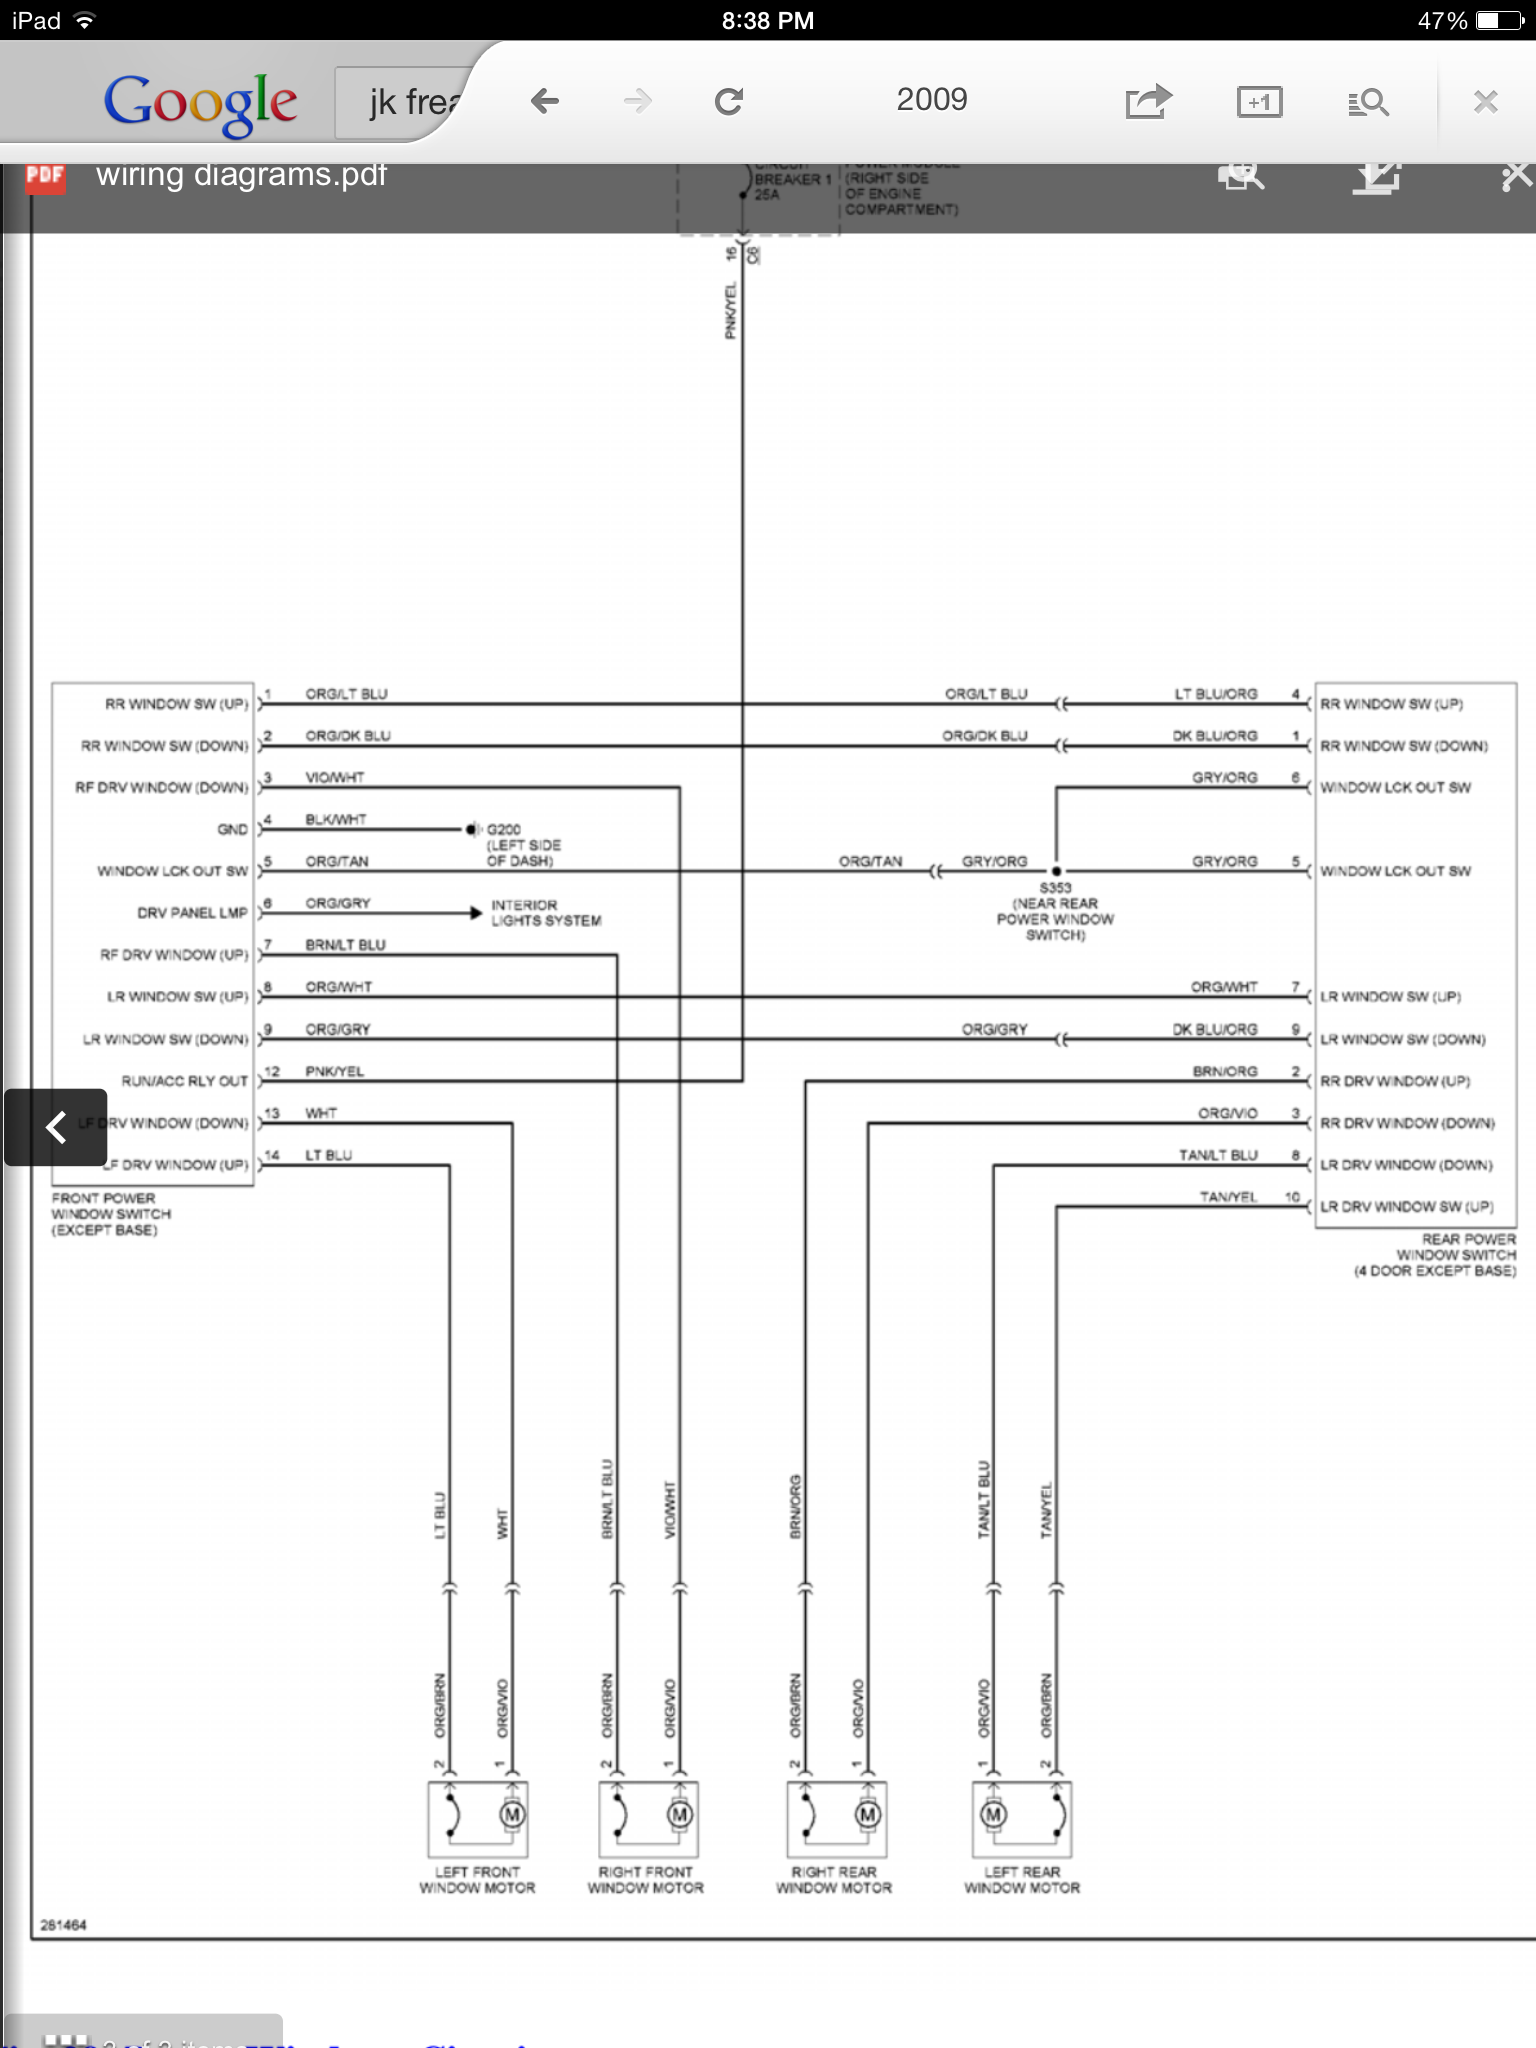 Wiring Diagram Of Rusi Motorcycle from www.jk-forum.com